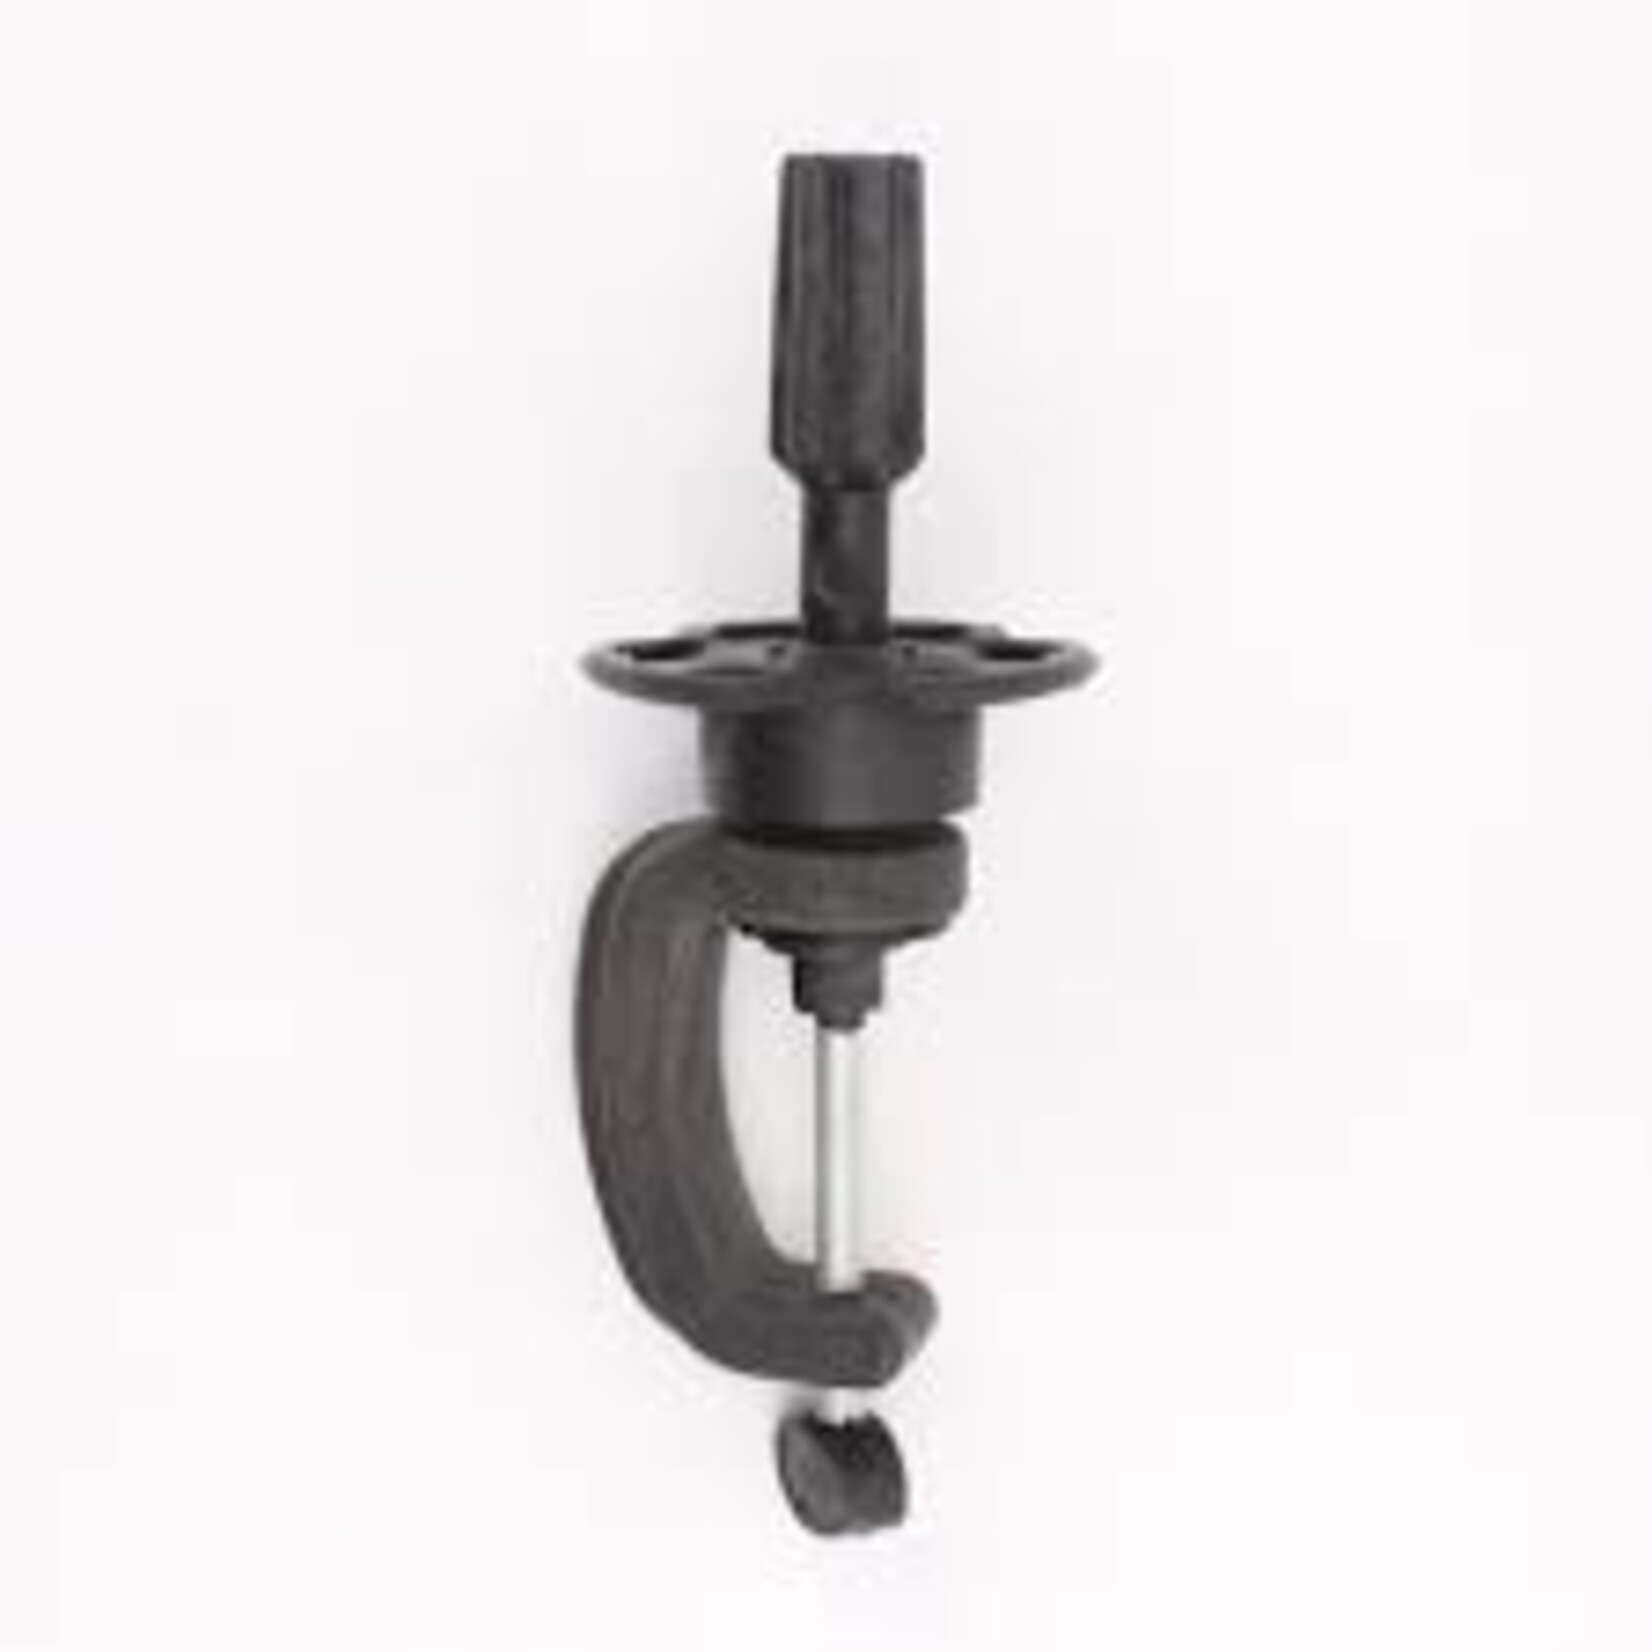 Adjustable Wig Head & Mannequin Stand Holder, C-clamp Table Top Clamp Stand